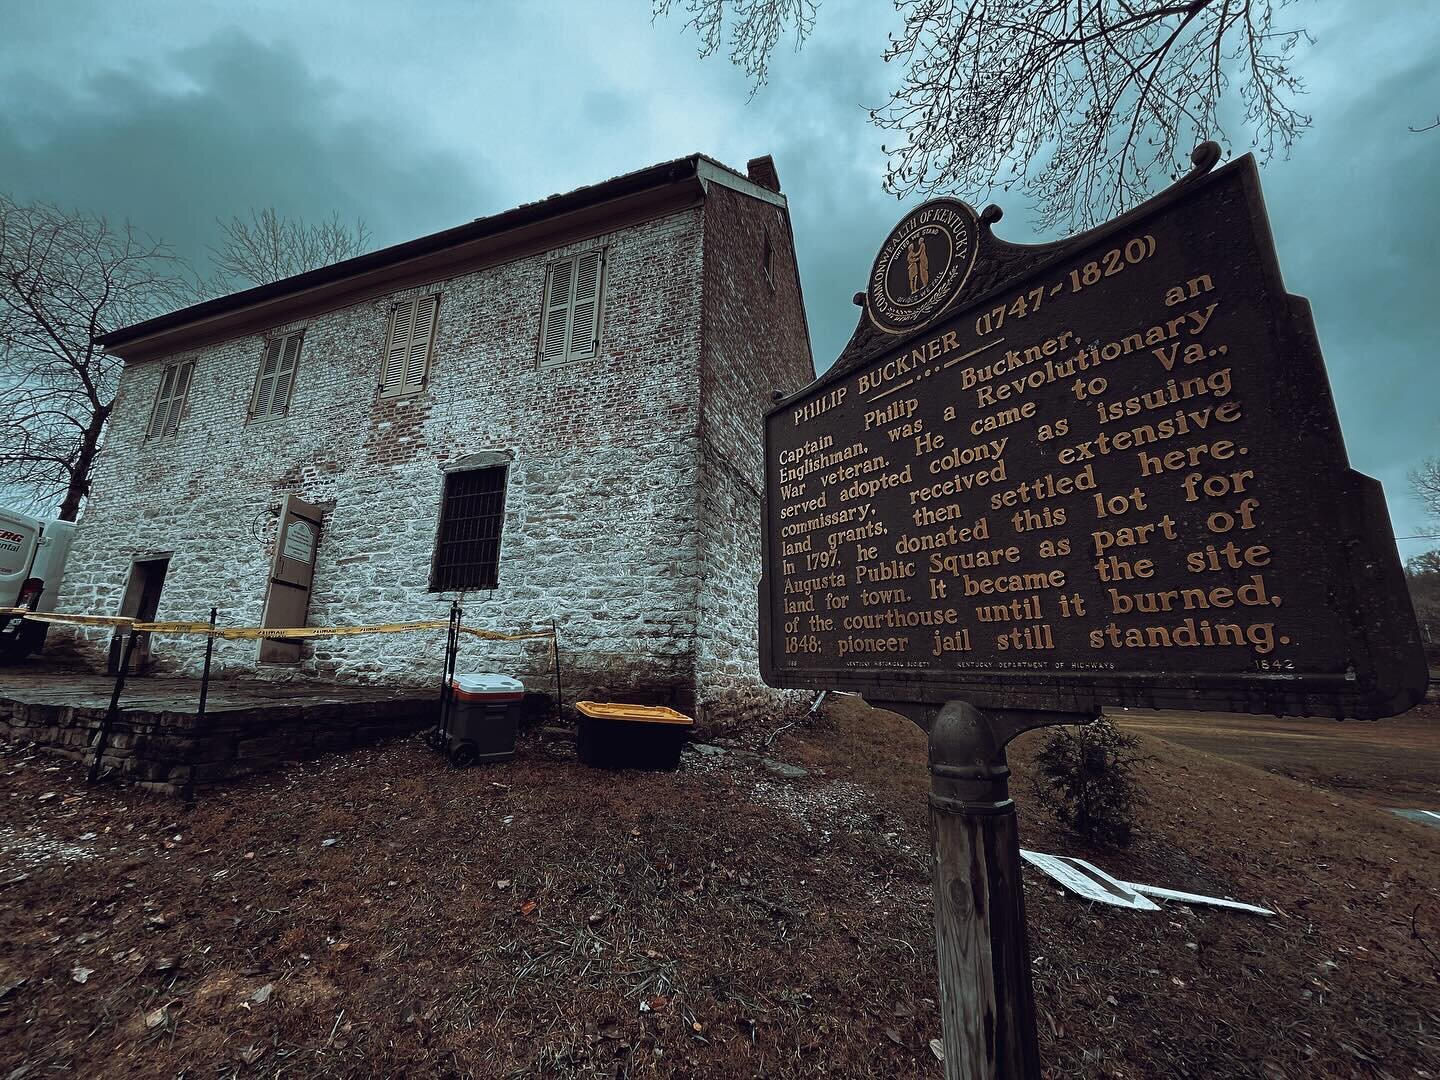 The team learns the Old Pioneer Jail&rsquo;s reported activity may pre-date the existence of prisoners who were subjected to horrific living conditions. Tonight on T+E 📺 👻